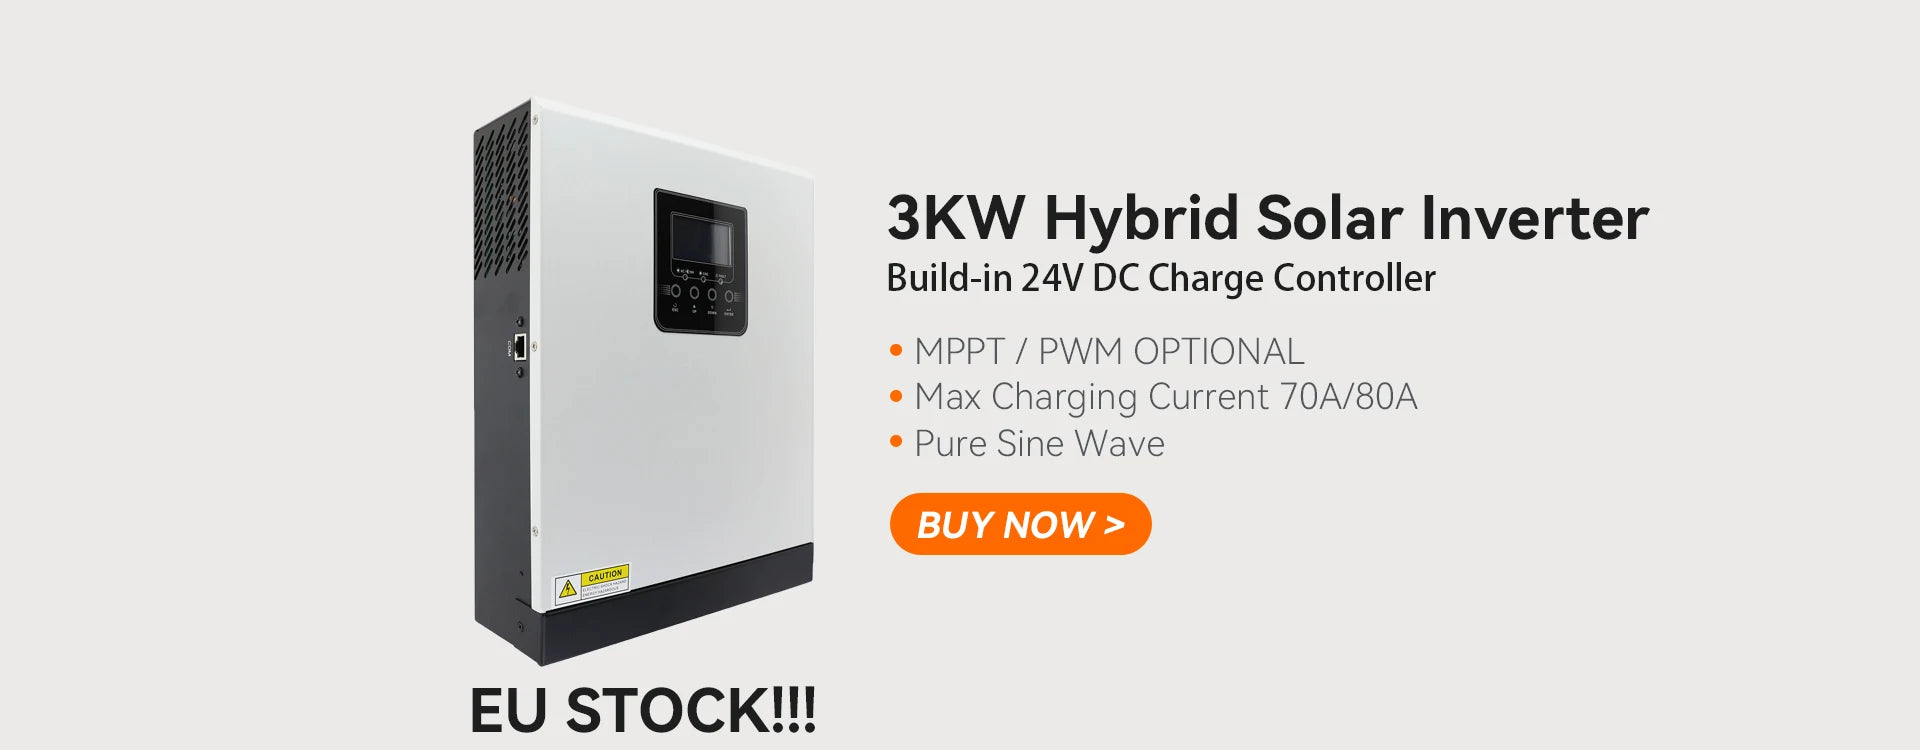 PowMr Solar Inverter, High-power solar inverter with charge controller and MPPT/PWM options for efficient energy harvesting.